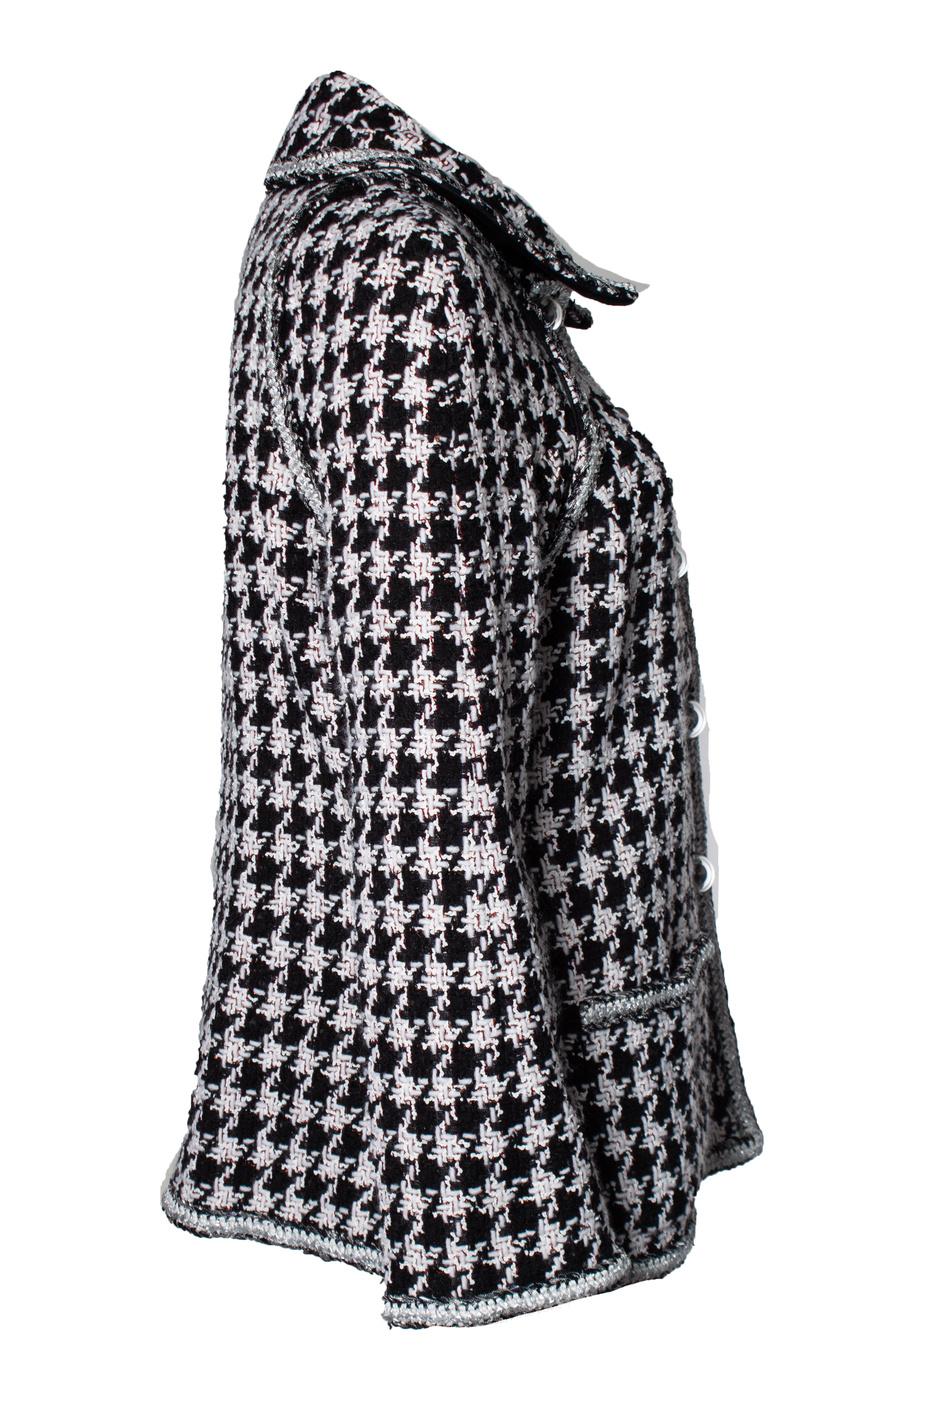 Women's Chanel, Black and white houndstooth jacket For Sale